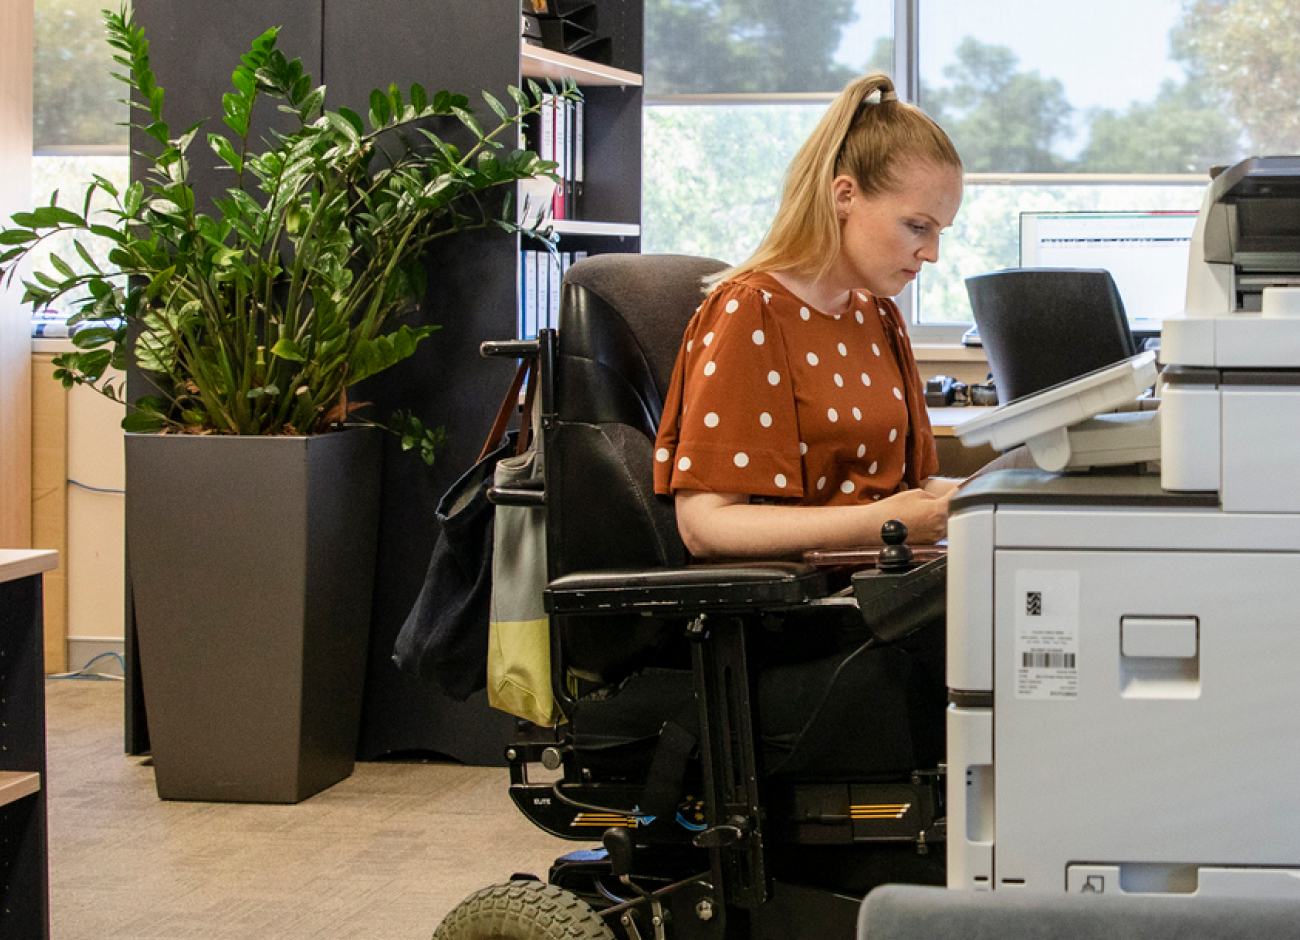 Woman in a wheel chair working in an office.